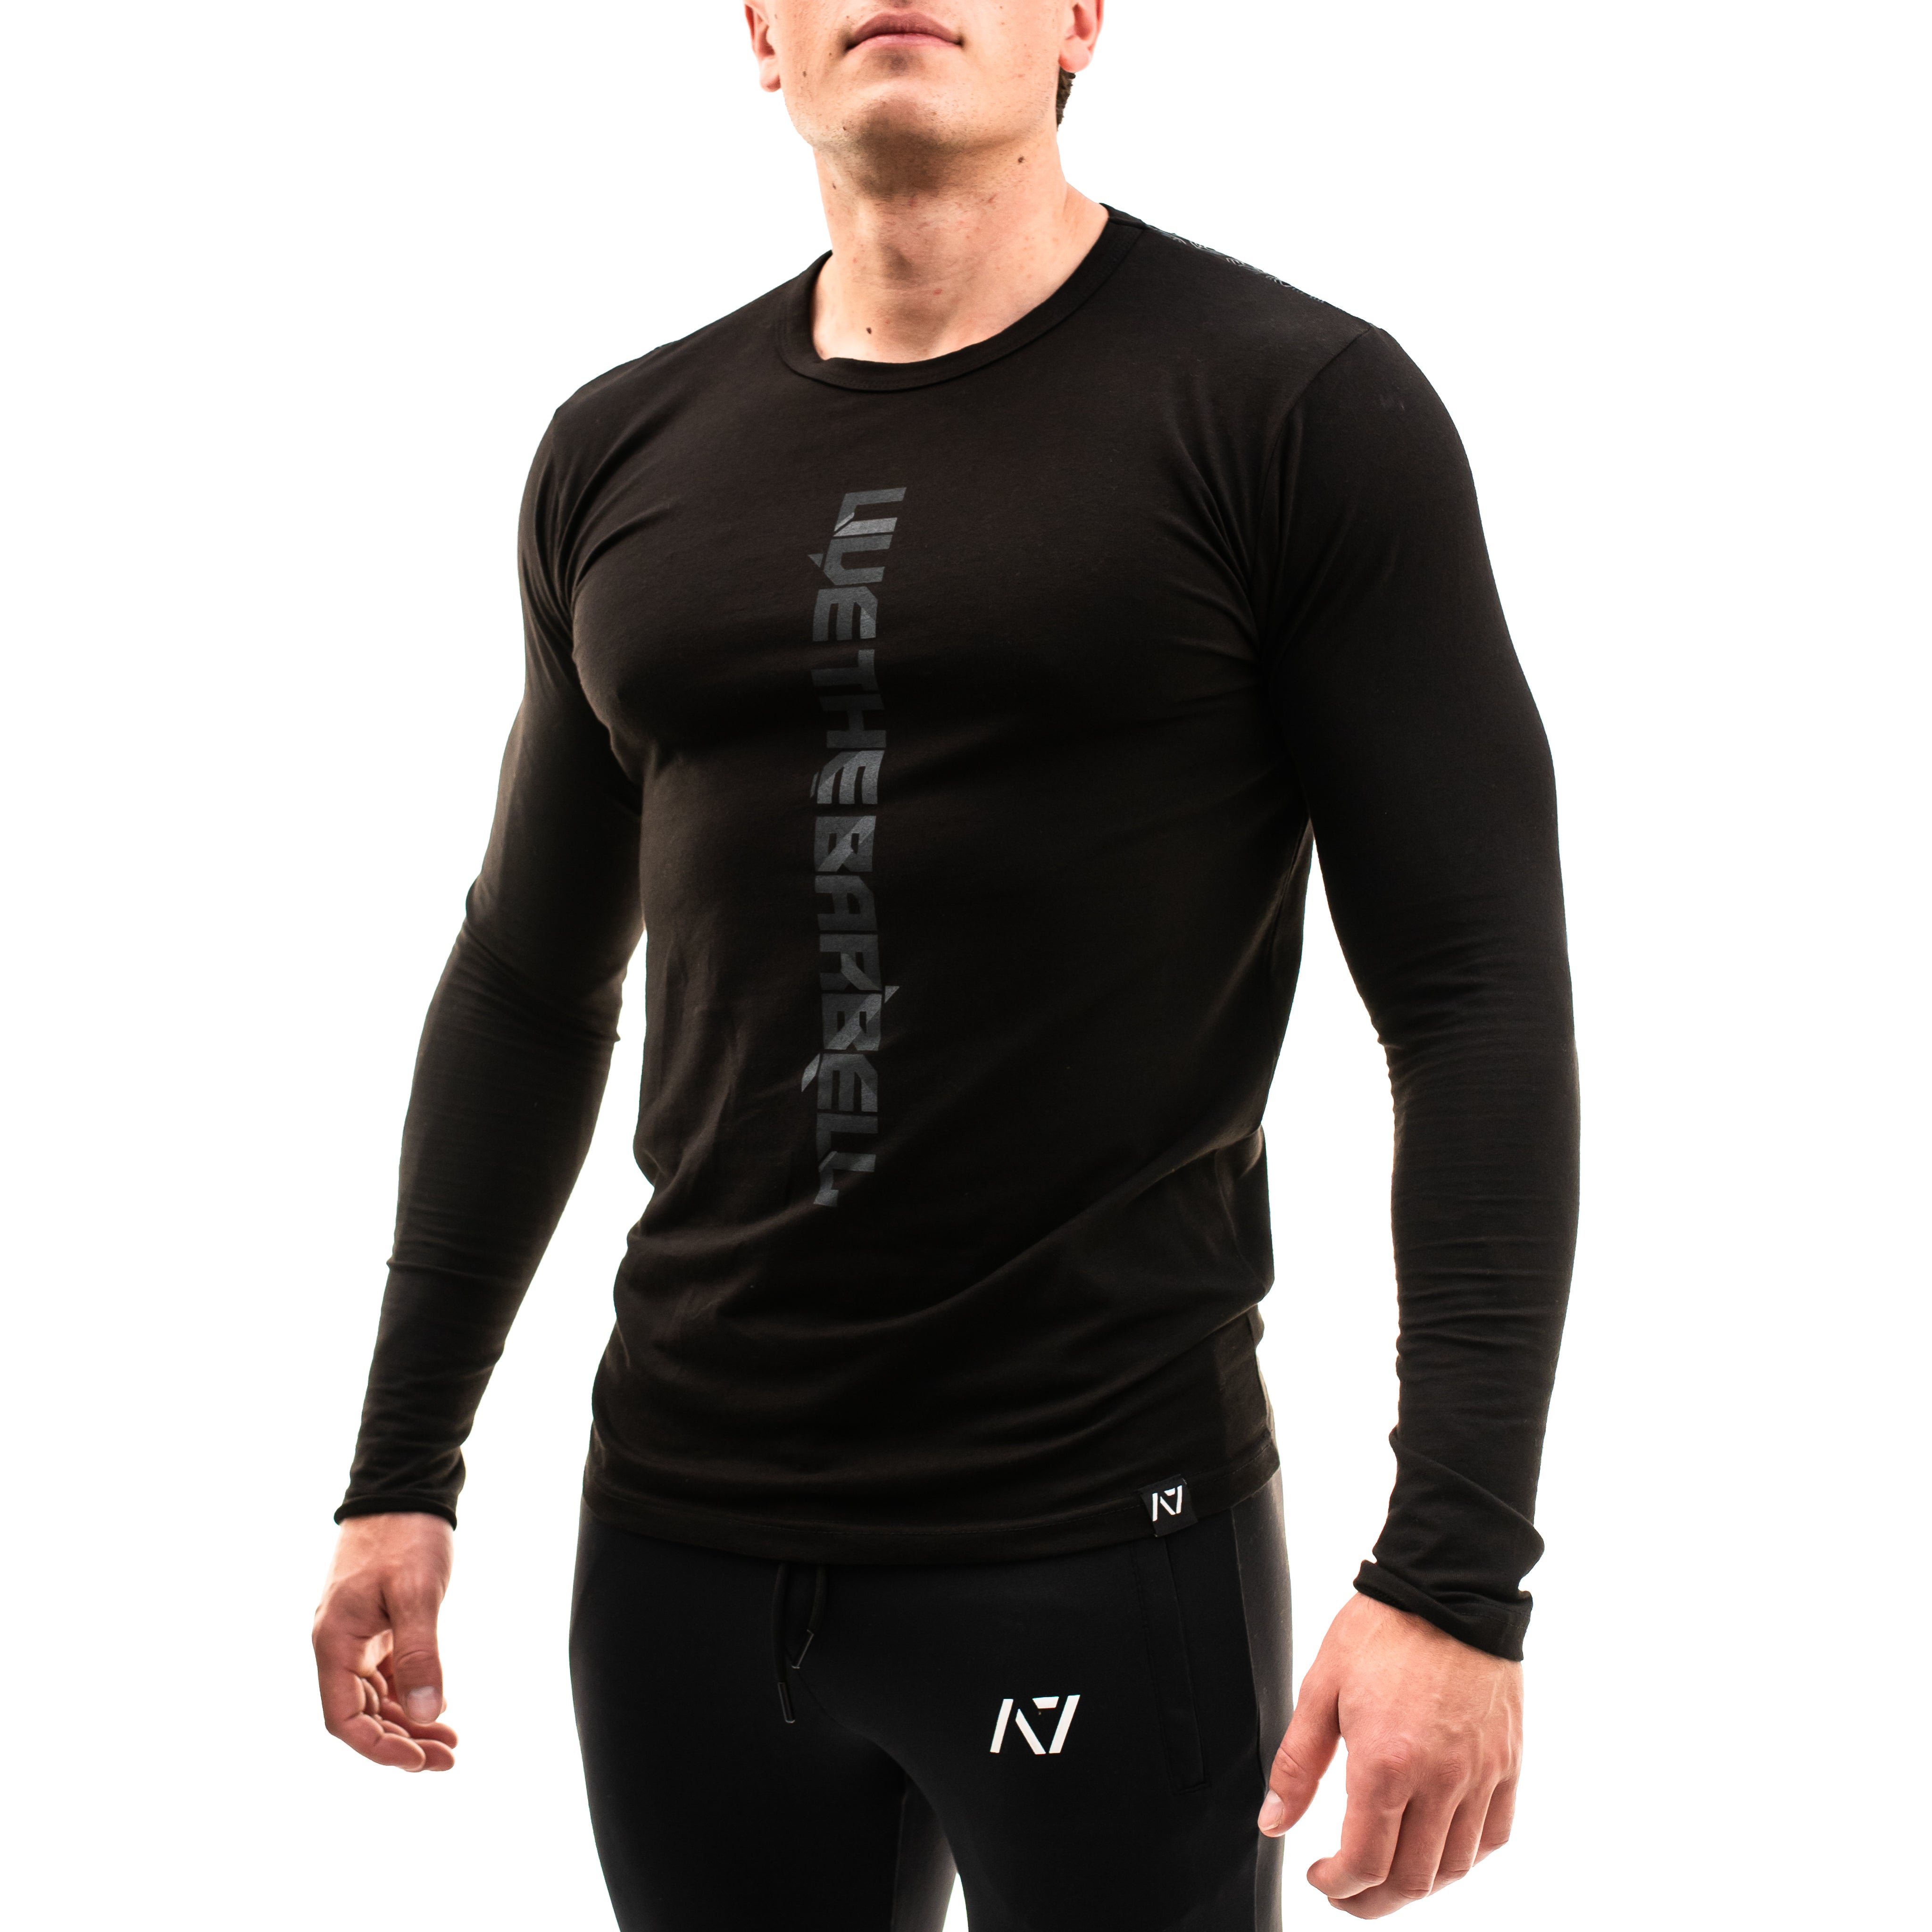 LTB Hinge Bar Grip T-shirt, great as a squat shirt. Purchase LTB Hinge Bar Grip t-shirt from A7 UK. Purchase LTB Hinge Bar Grip Shirt Europe from A7 Europe. No more chalk and no more sliding. Best Bar Grip T shirts, shipping to UK and Europe from A7 UK. A7UK has the best Powerlifting apparel for all your workouts. Available in UK and Europe including France, Italy, Germany, the Netherlands, Sweden and Poland.